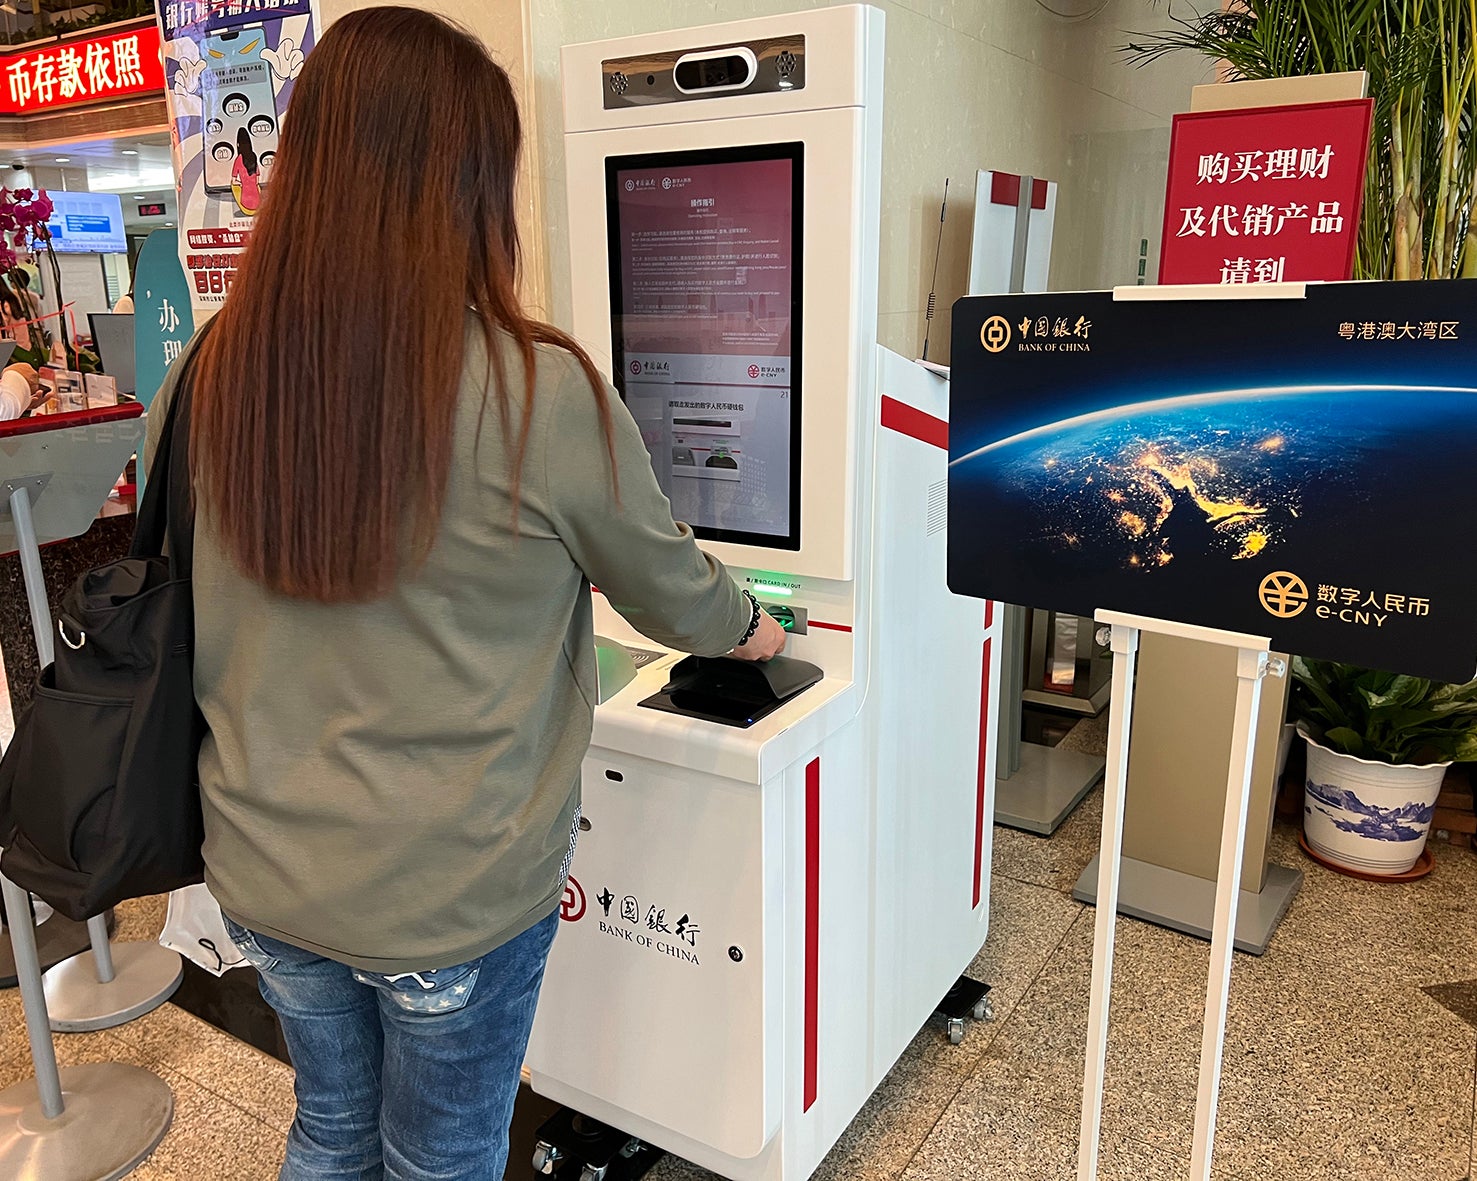 A customer registers for an e-CNY wallet card through a self-service machine at a branch of Bank of China in Shenzhen, Guangdong province, in February